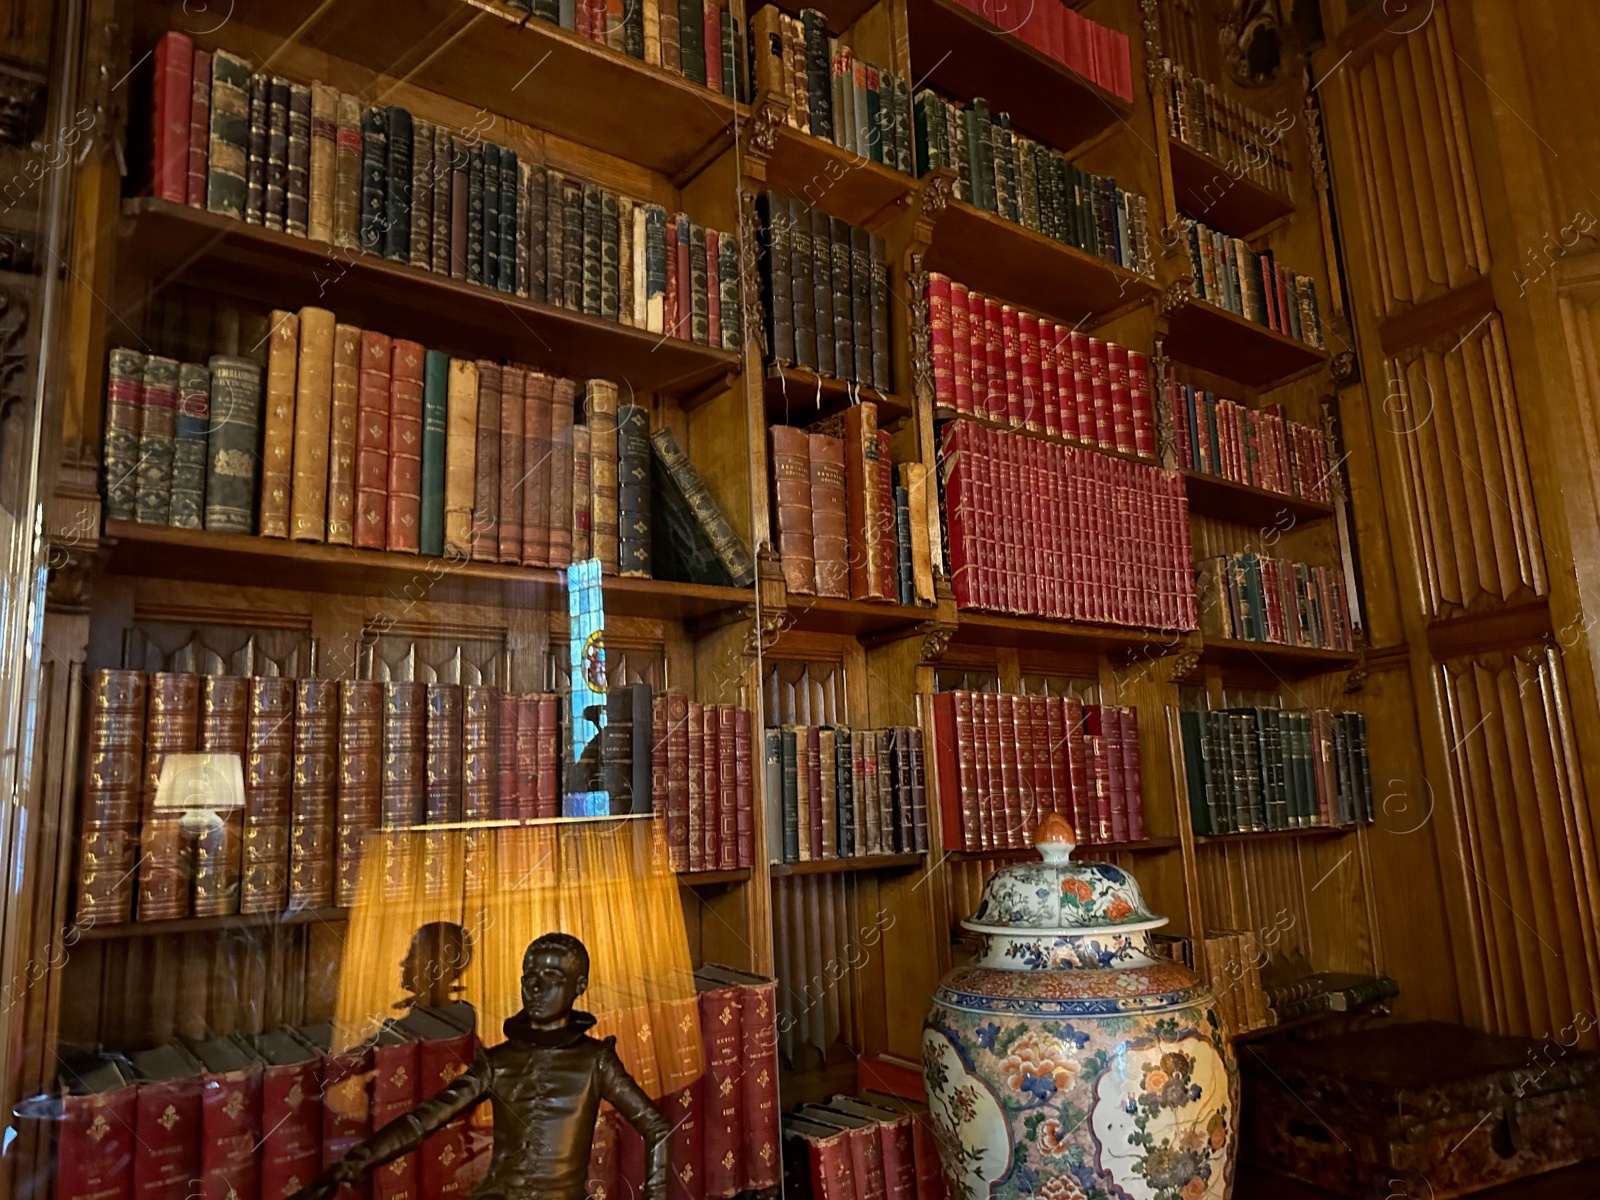 Photo of Utrecht, Netherlands - June 17, 2024: Bookcase with old books, antique vase and bronze statue of Henry IV as child in De Haar castle